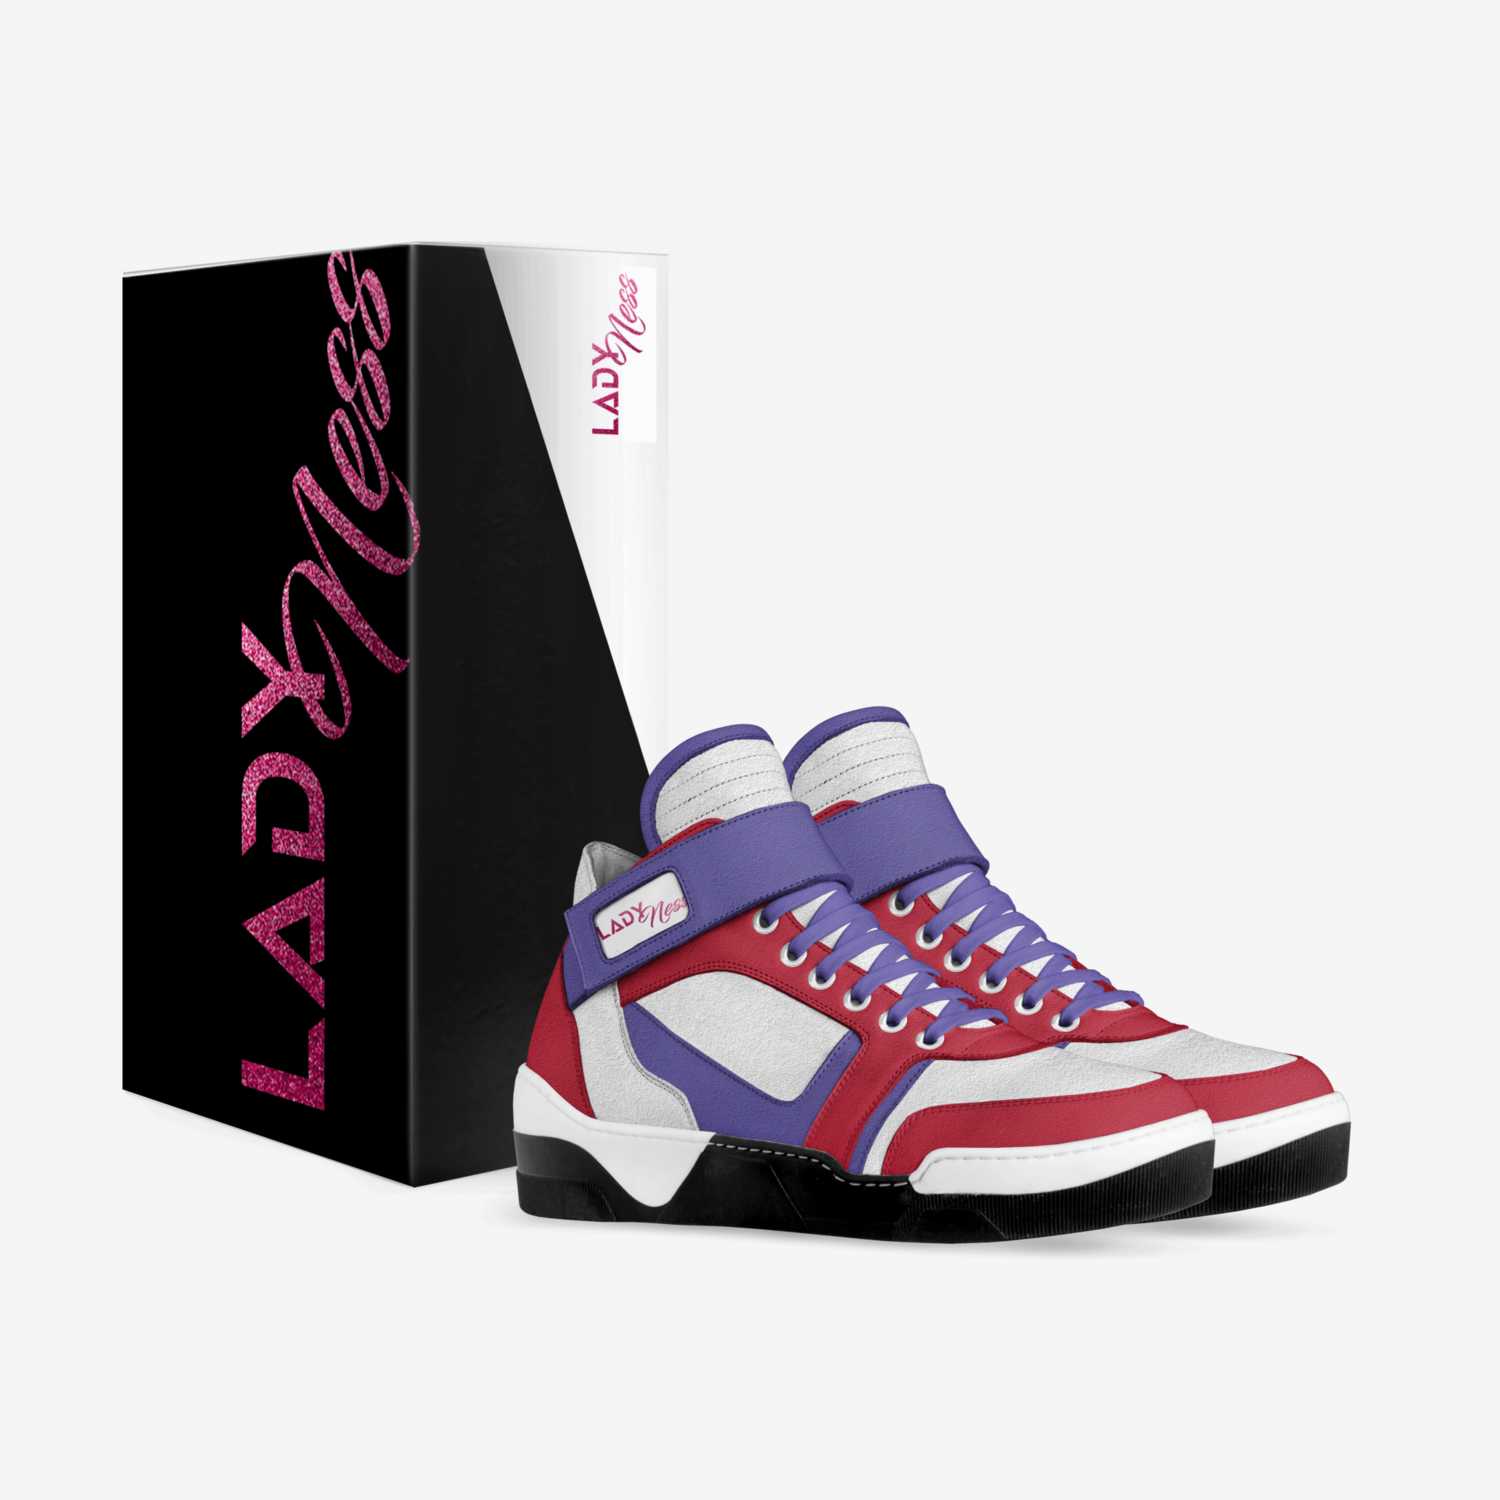 LadyNess custom made in Italy shoes by Lady Ness | Box view